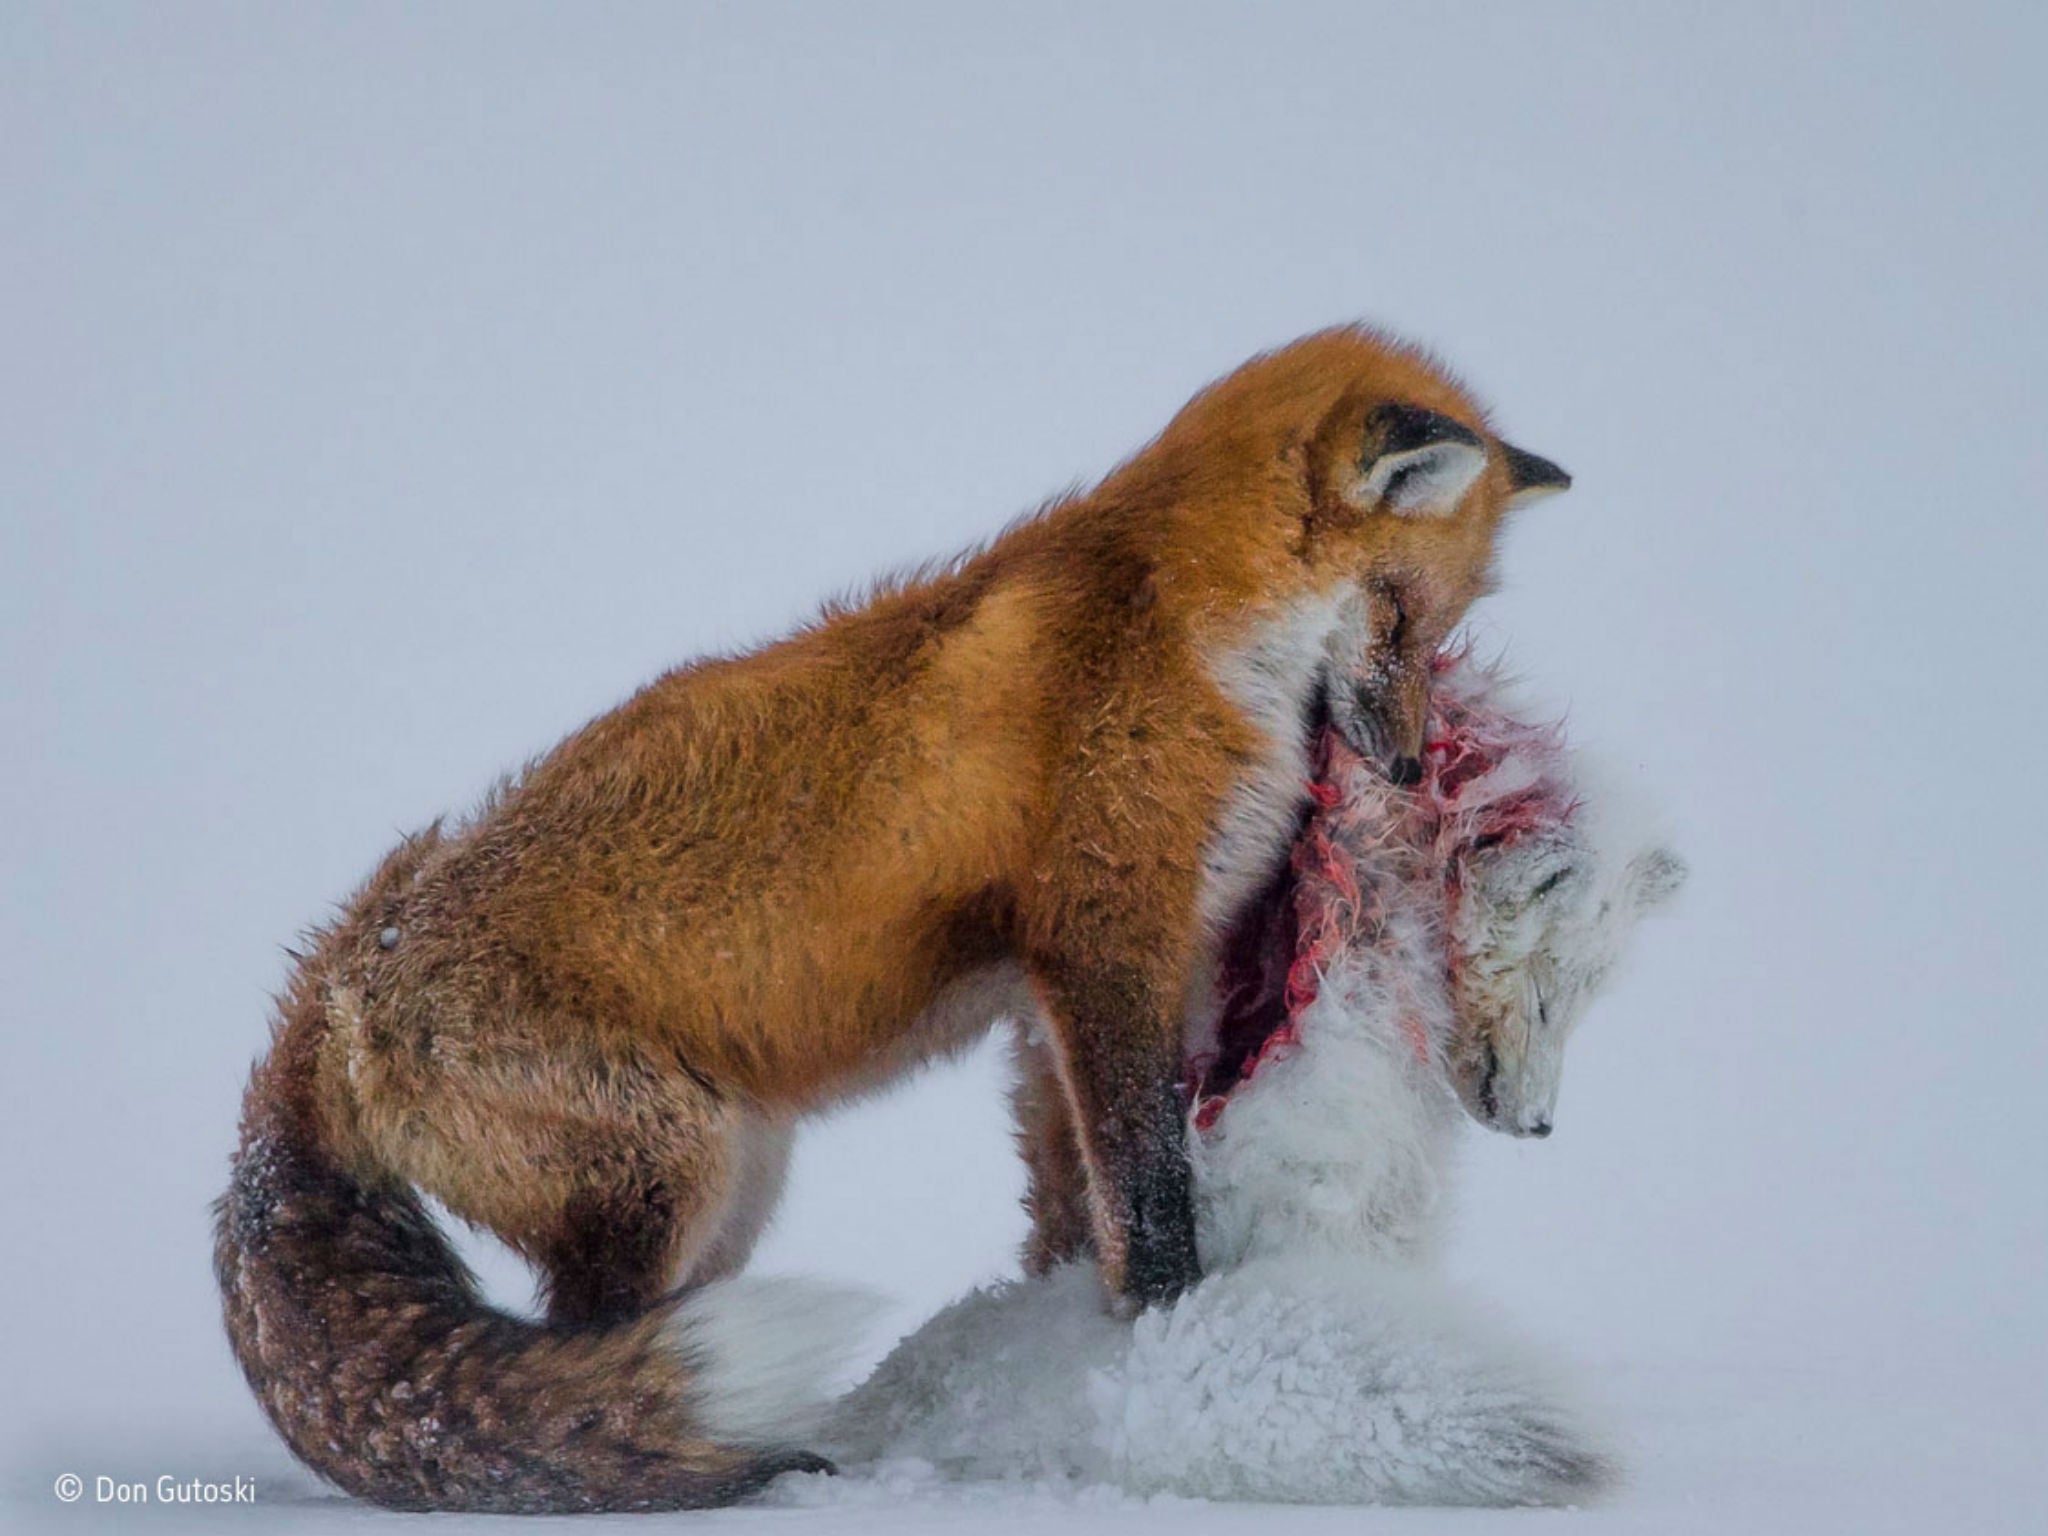 Don Gutoski wins Wildlife Photographer of the Year with 'A Tale of Two Foxes'